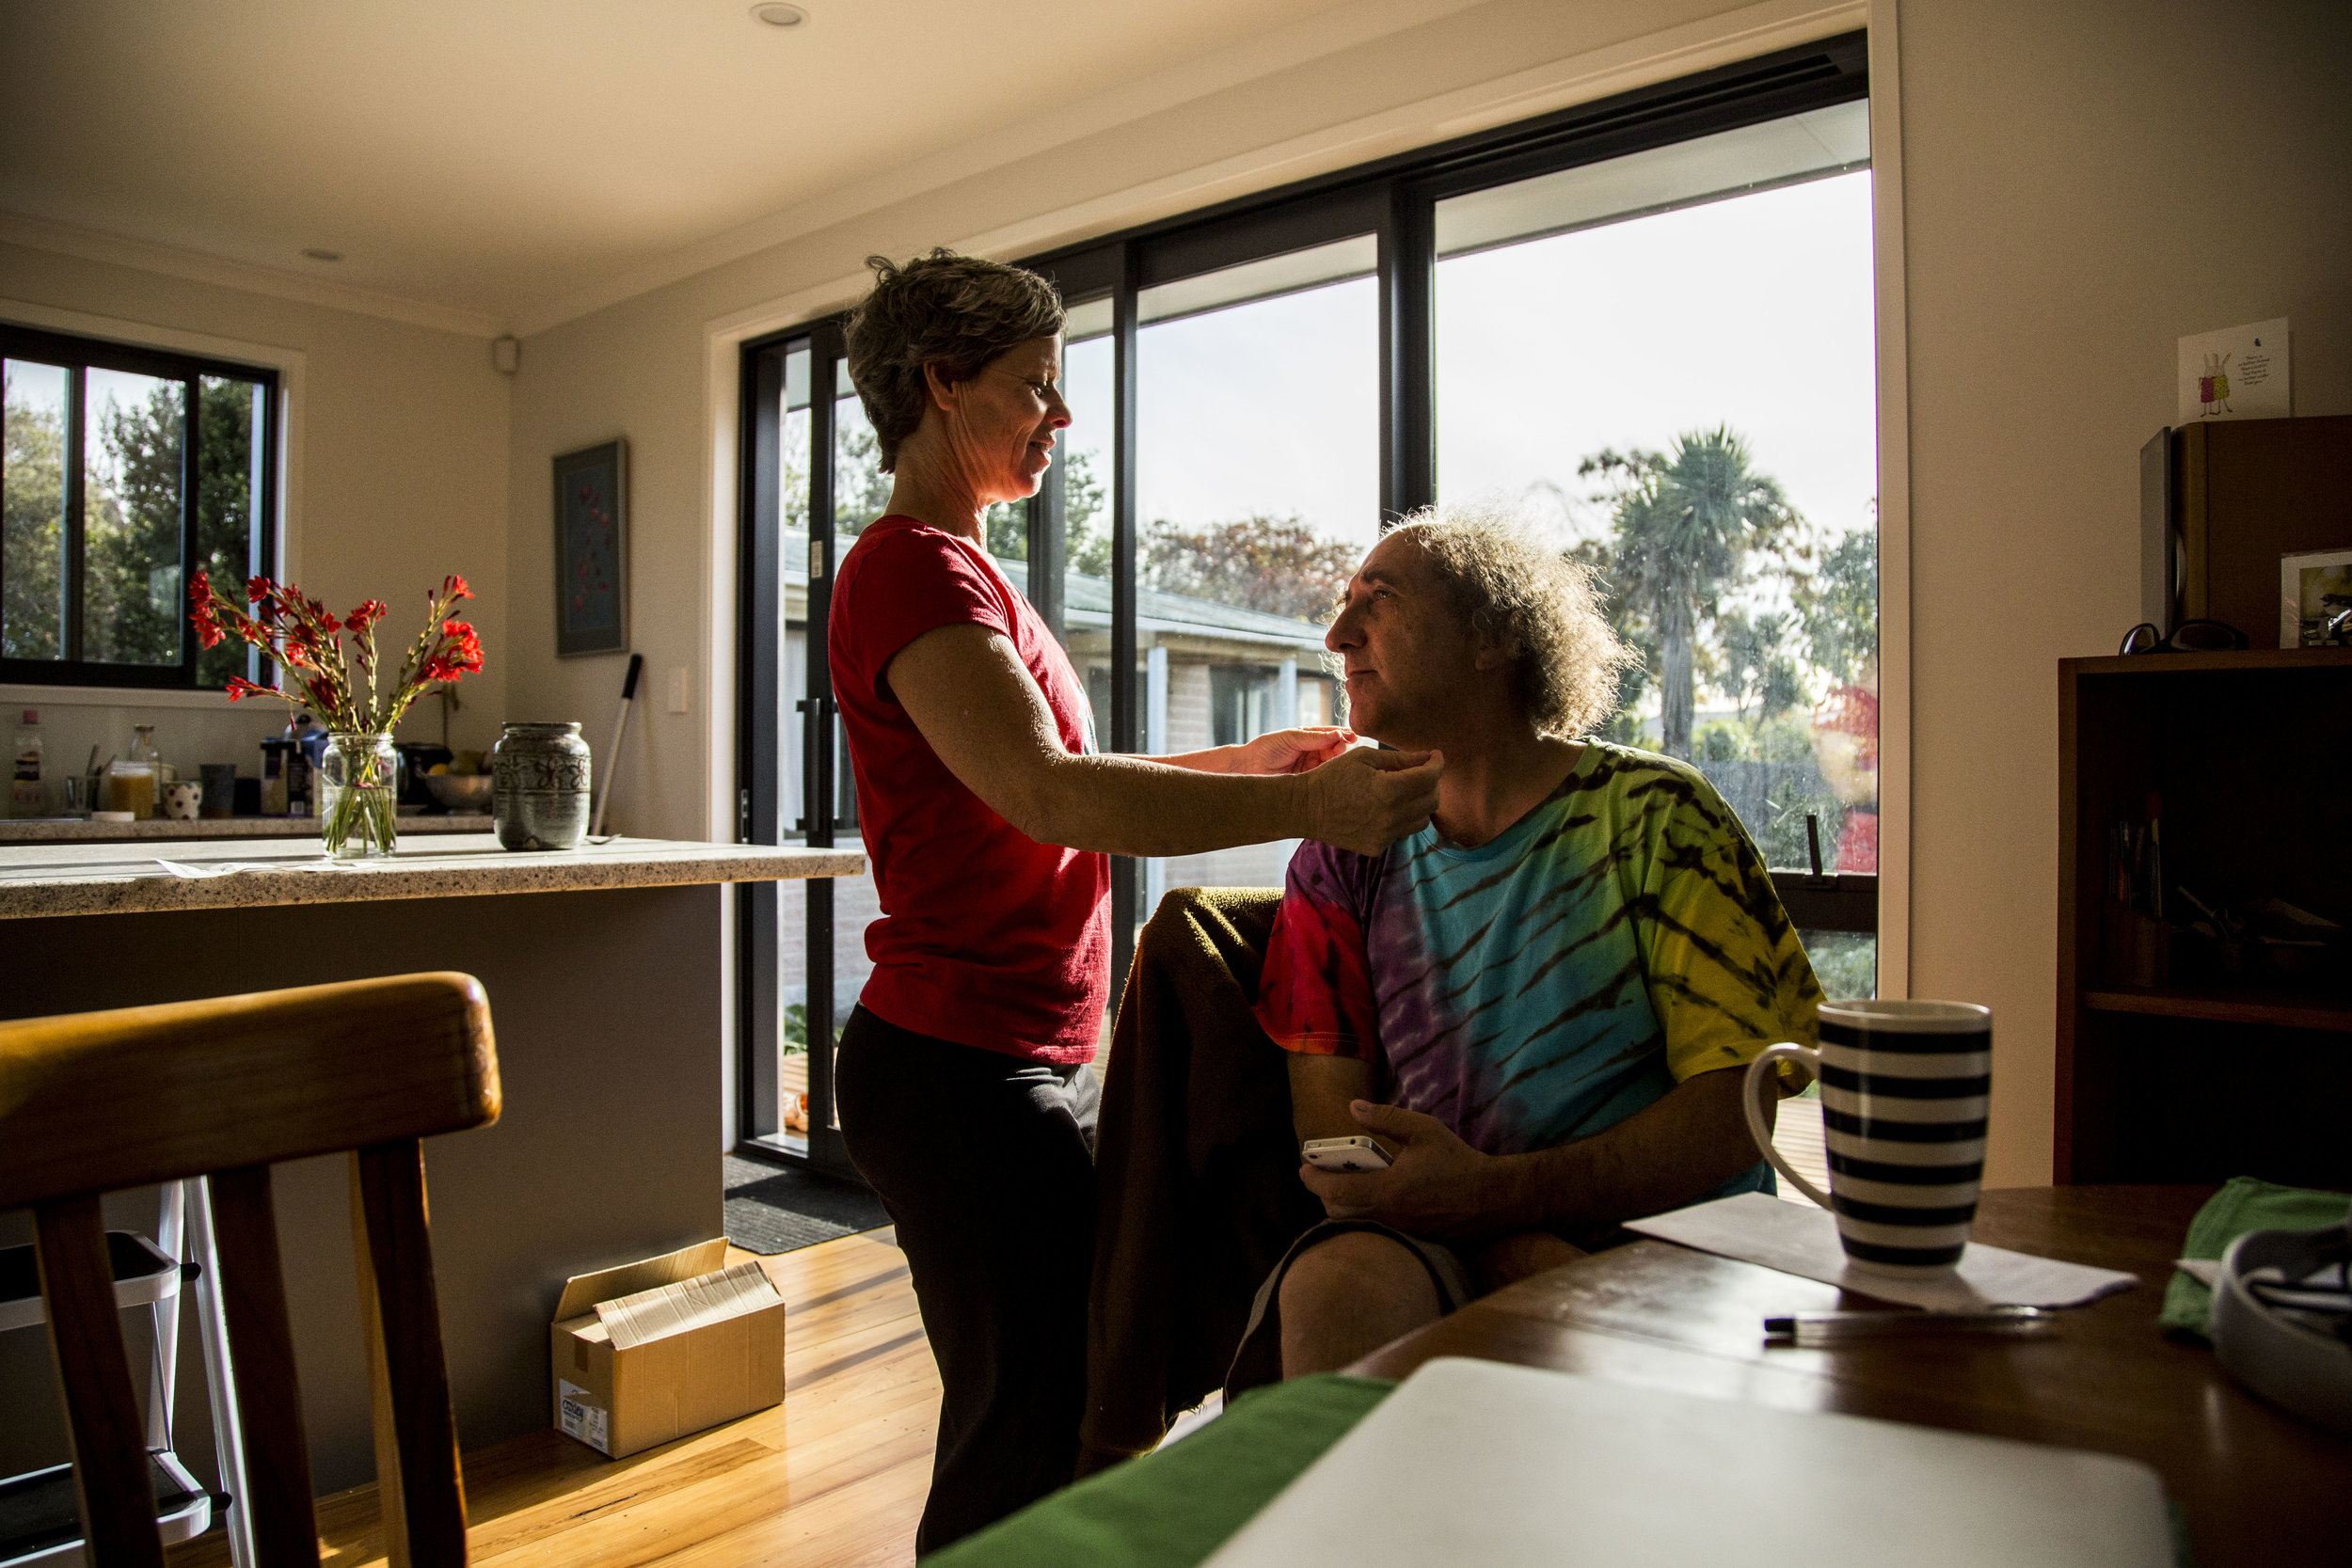  Wingfield (left) and Carrow (right) embrace in their Christchurch, NZ home on May 3, 2016. In addition to losing their circus school, their home was also destroyed in the aftermath of the earthquake. They've just recently finished rebuilding their h